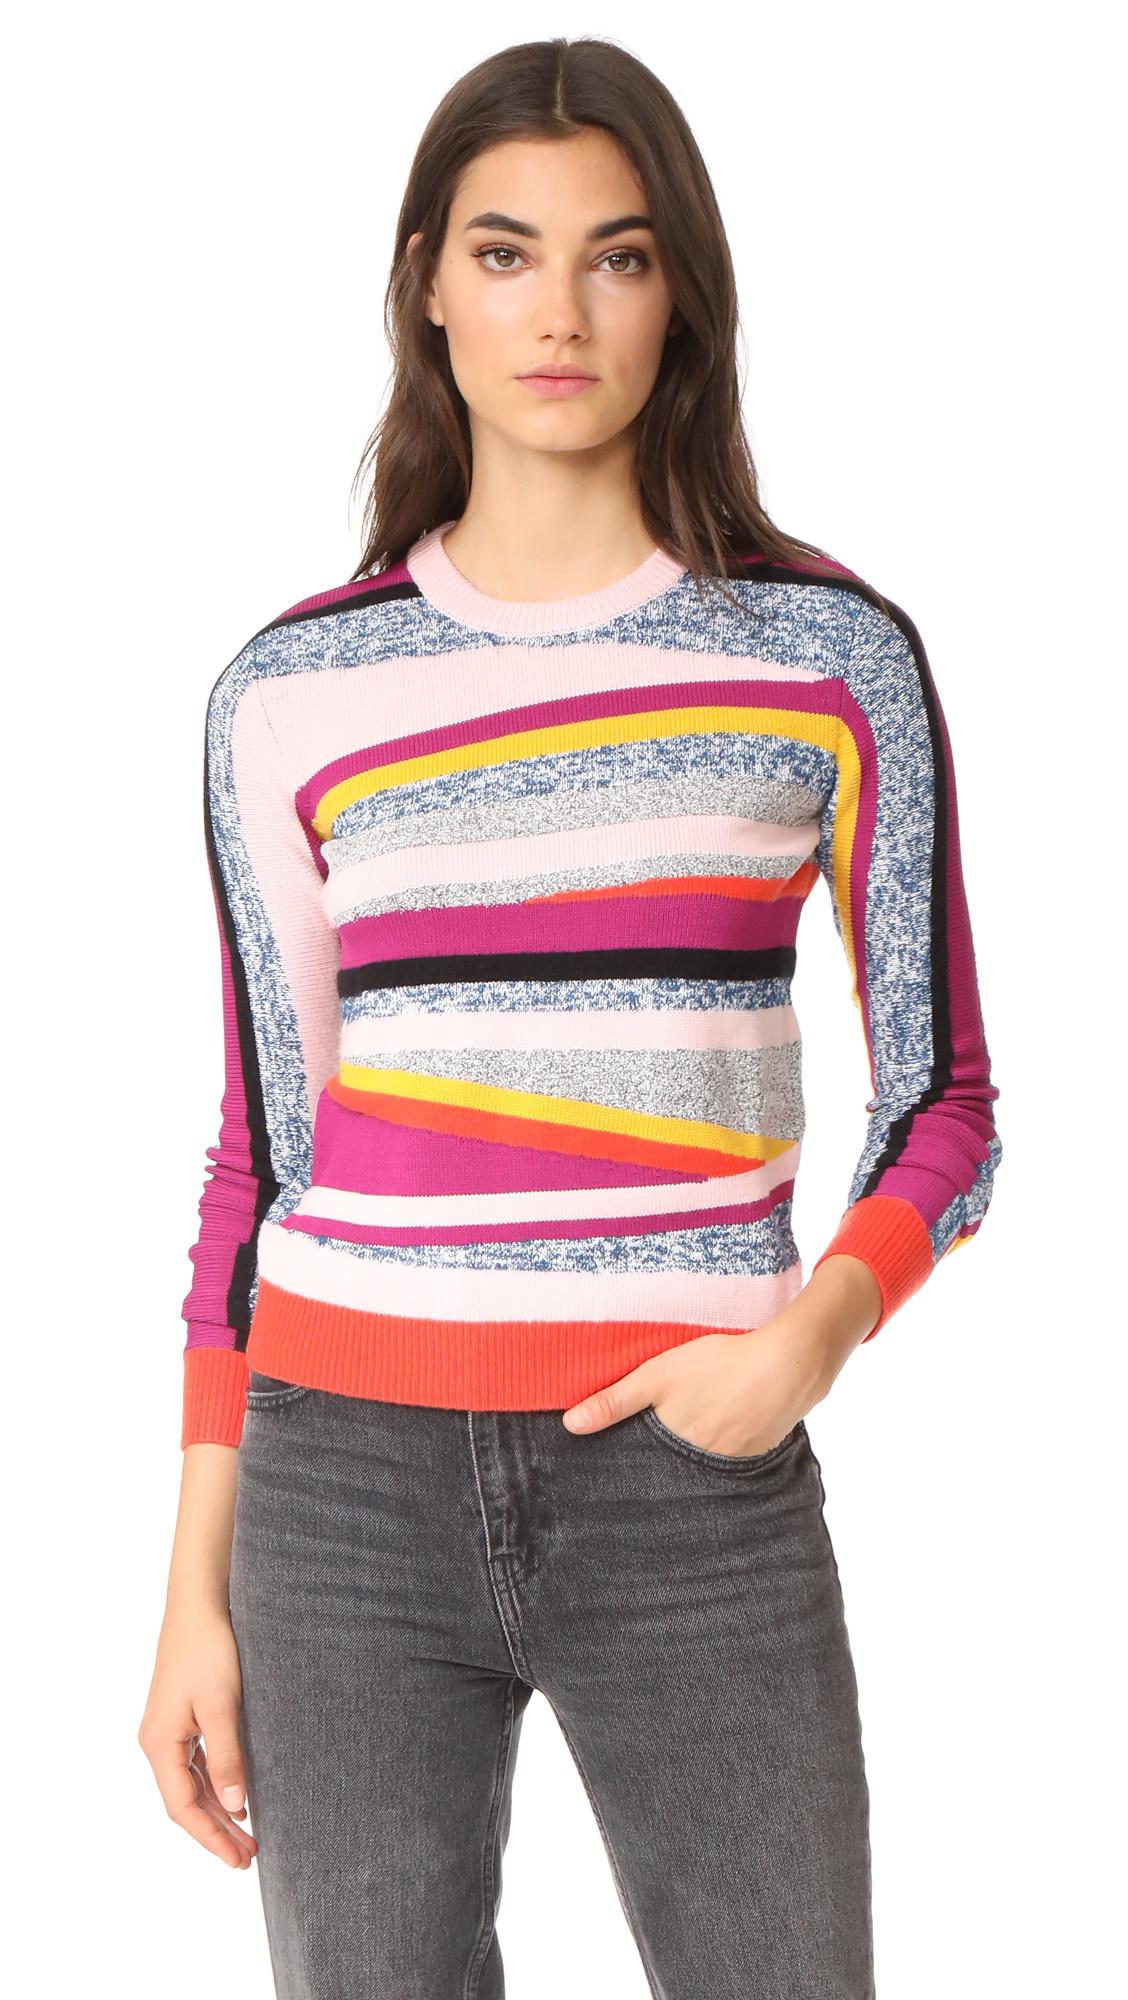 Lyst - Kenzo Crew Neck Fitted Sweater in Pink